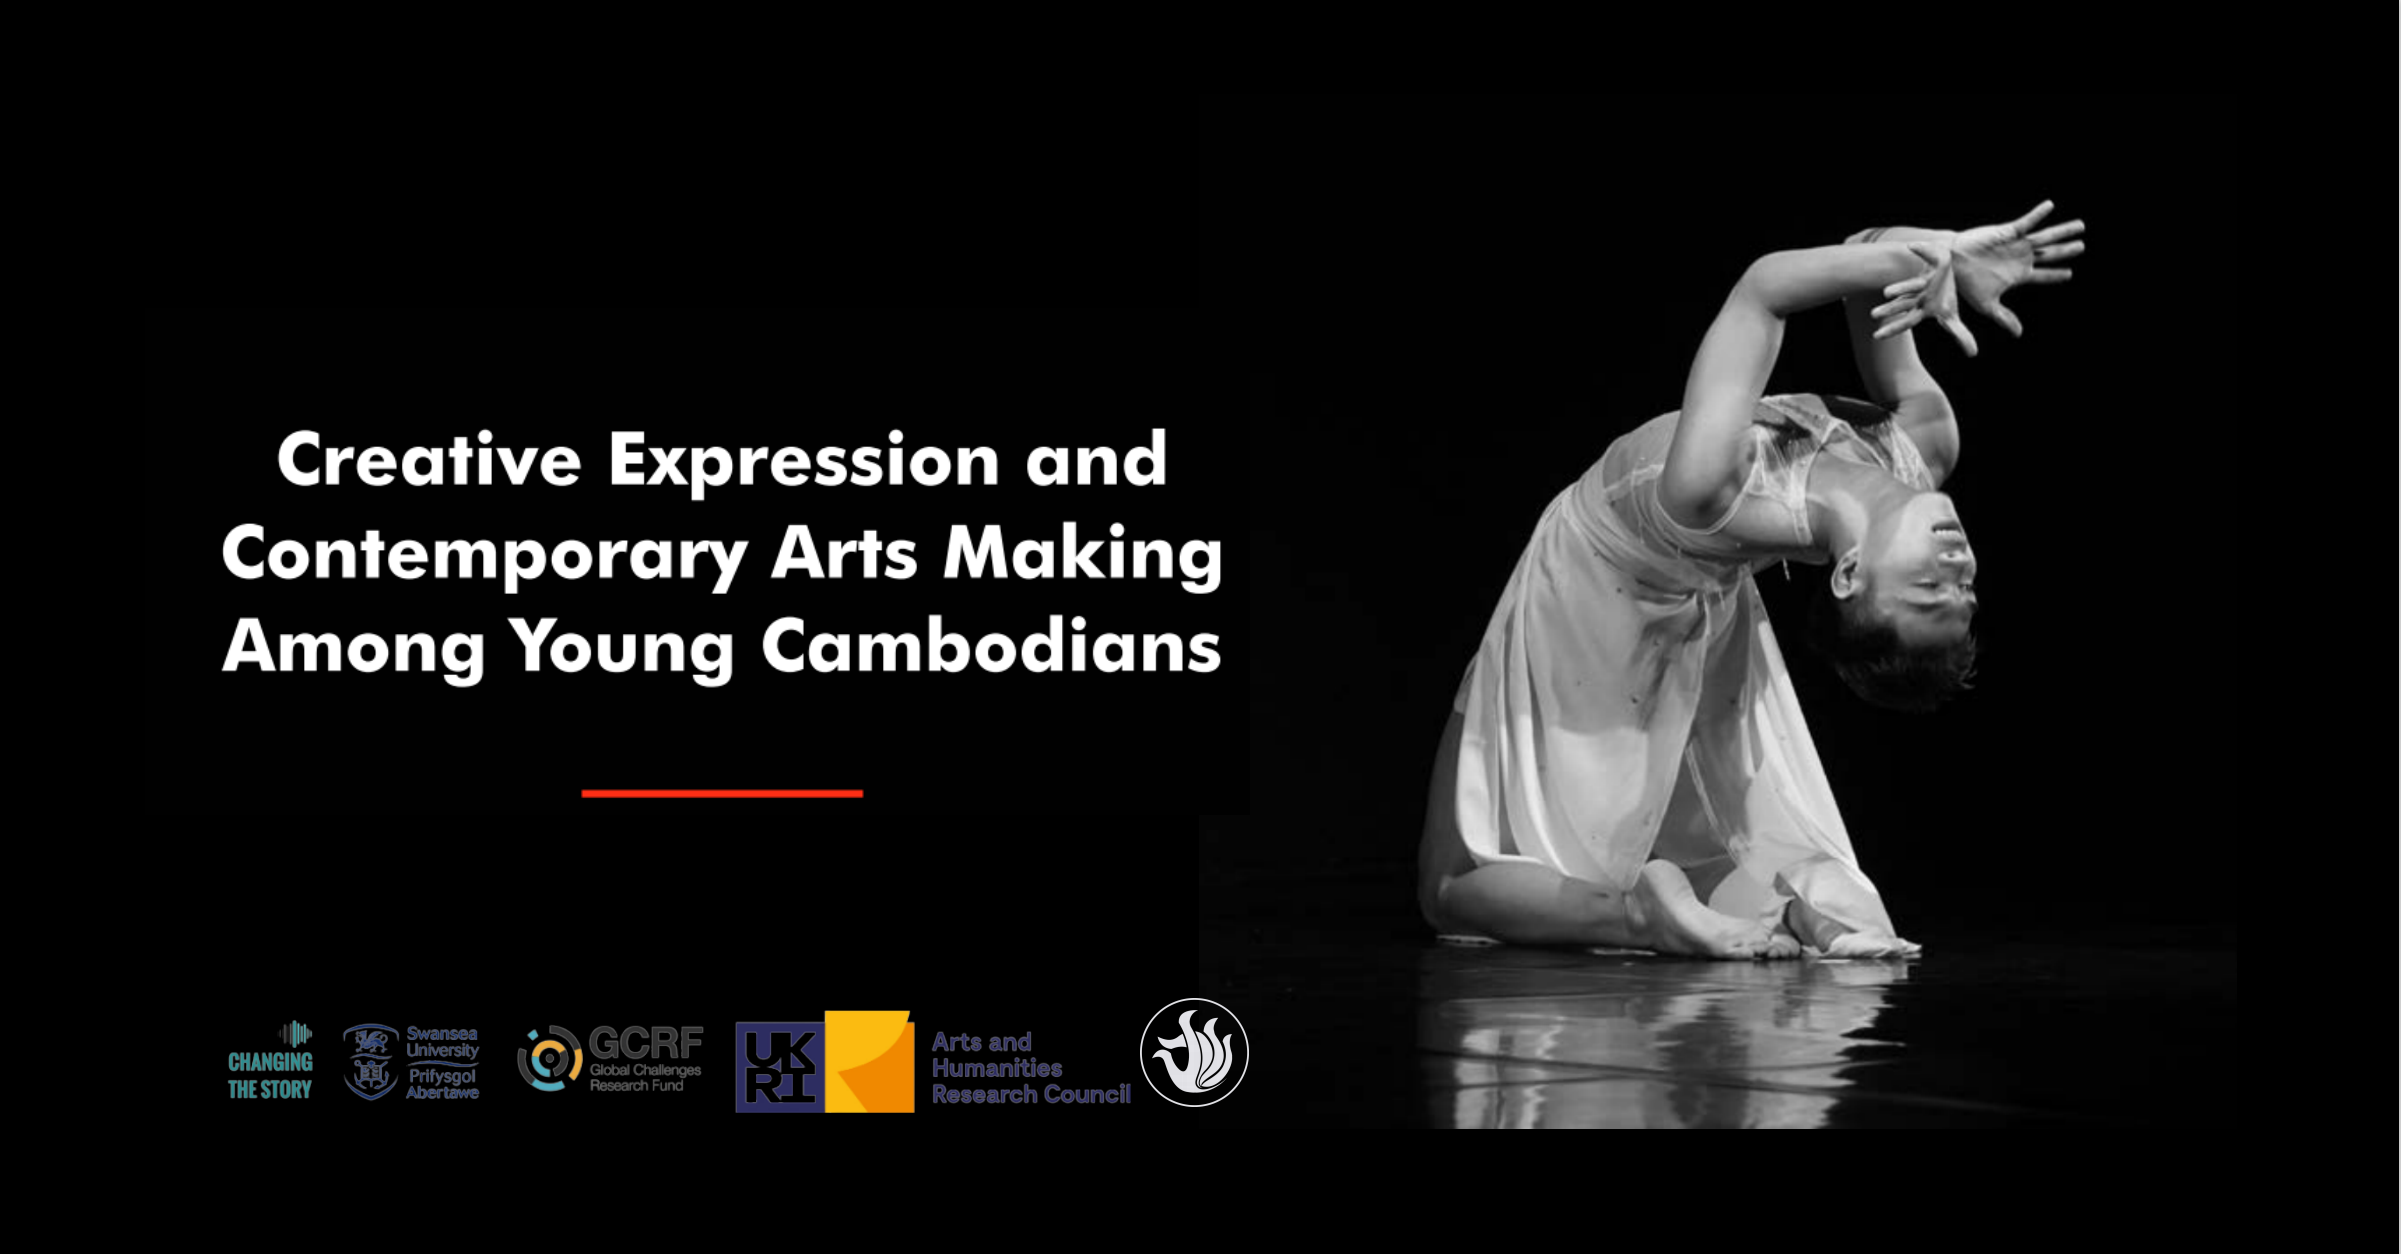 Creative Expression and Contemporary Arts Making Among Young Cambodians